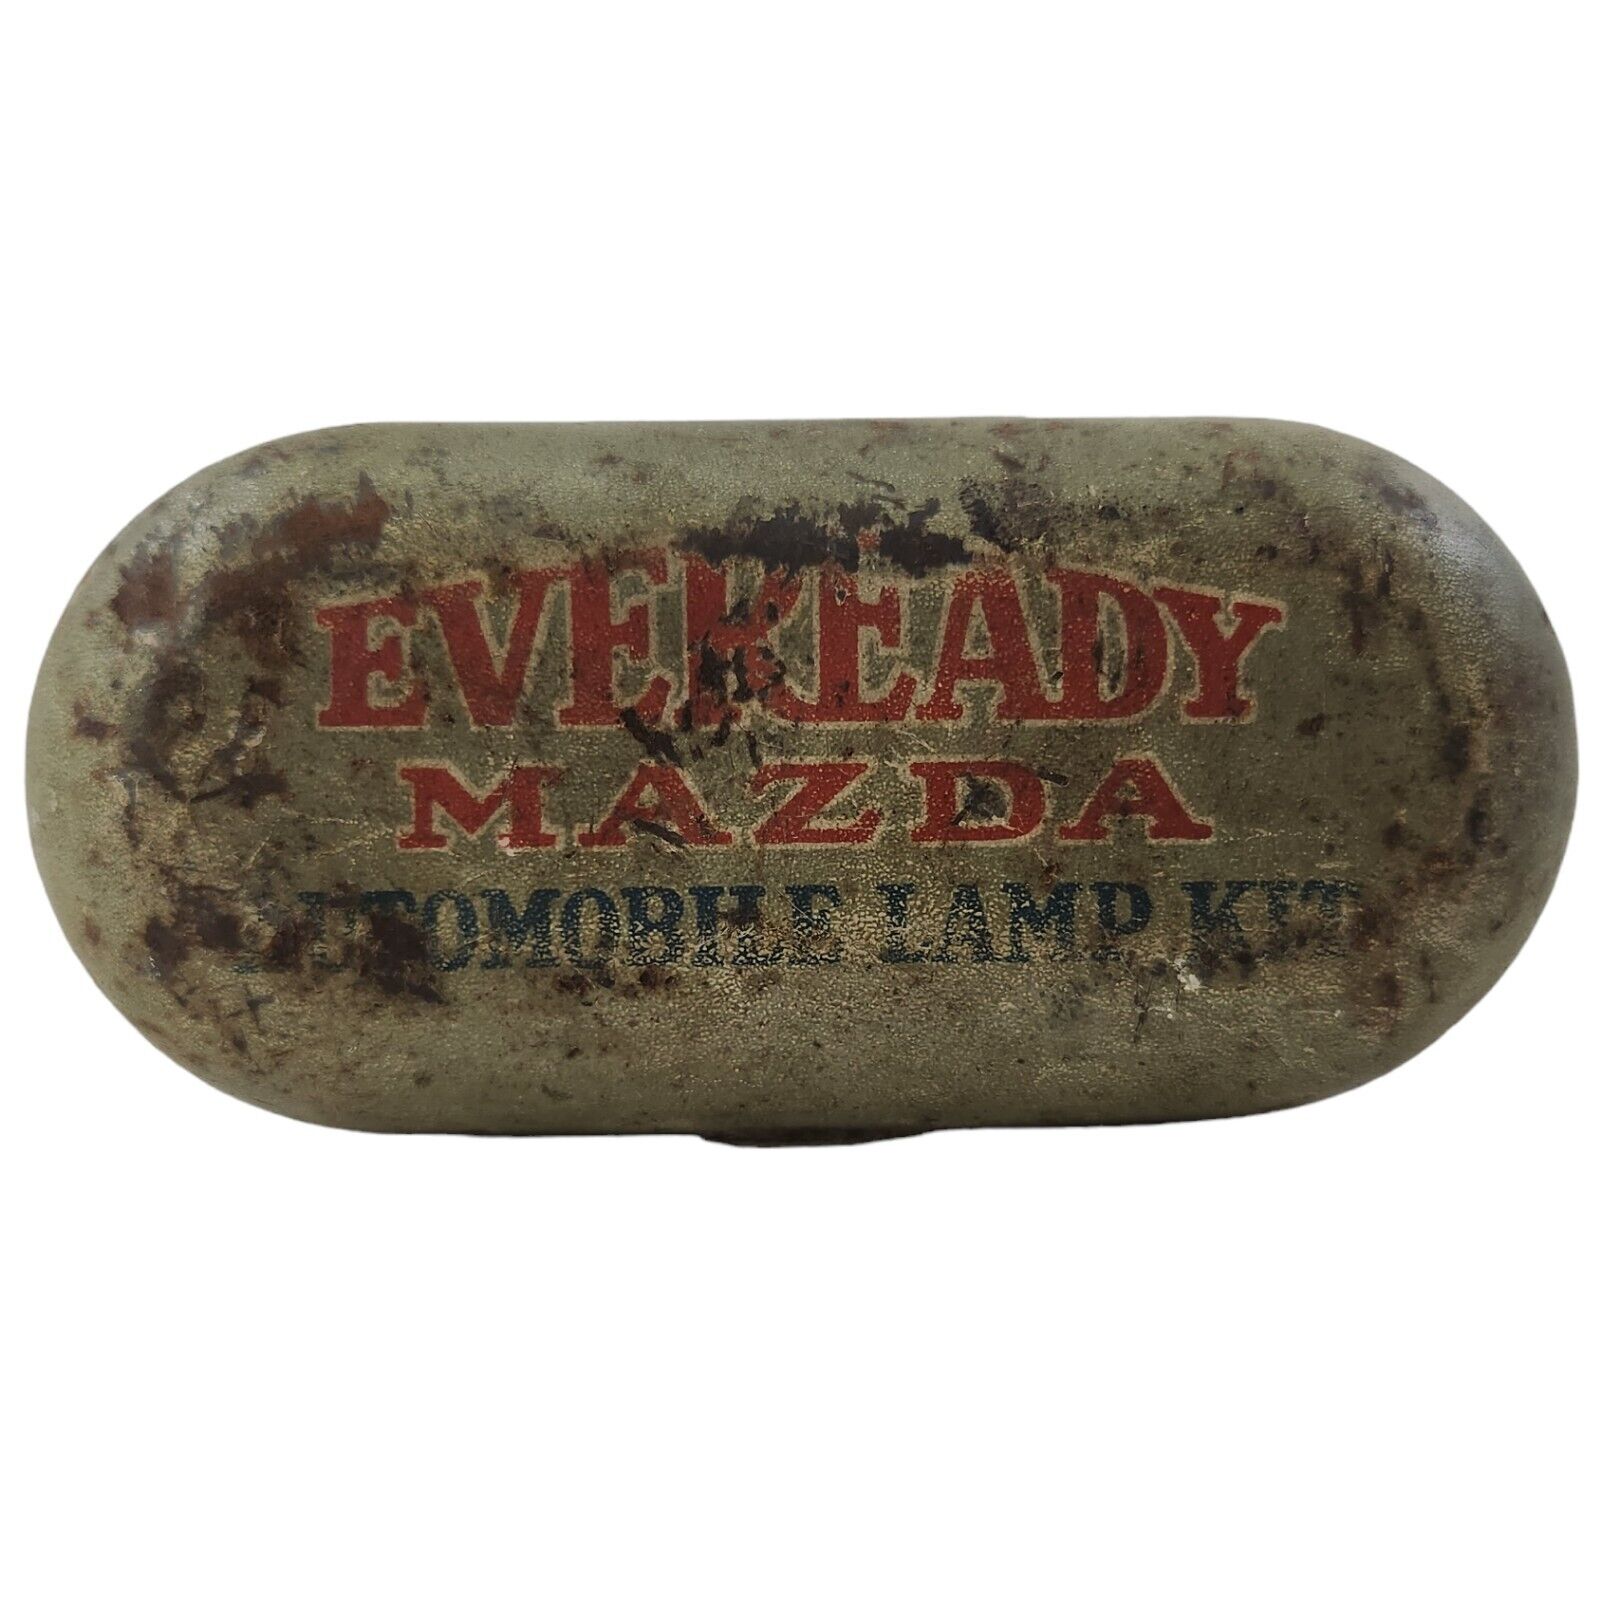 Vintage 1930\'s Eveready Mazda Automobile Lamp Kit Tin Canister Collectible 